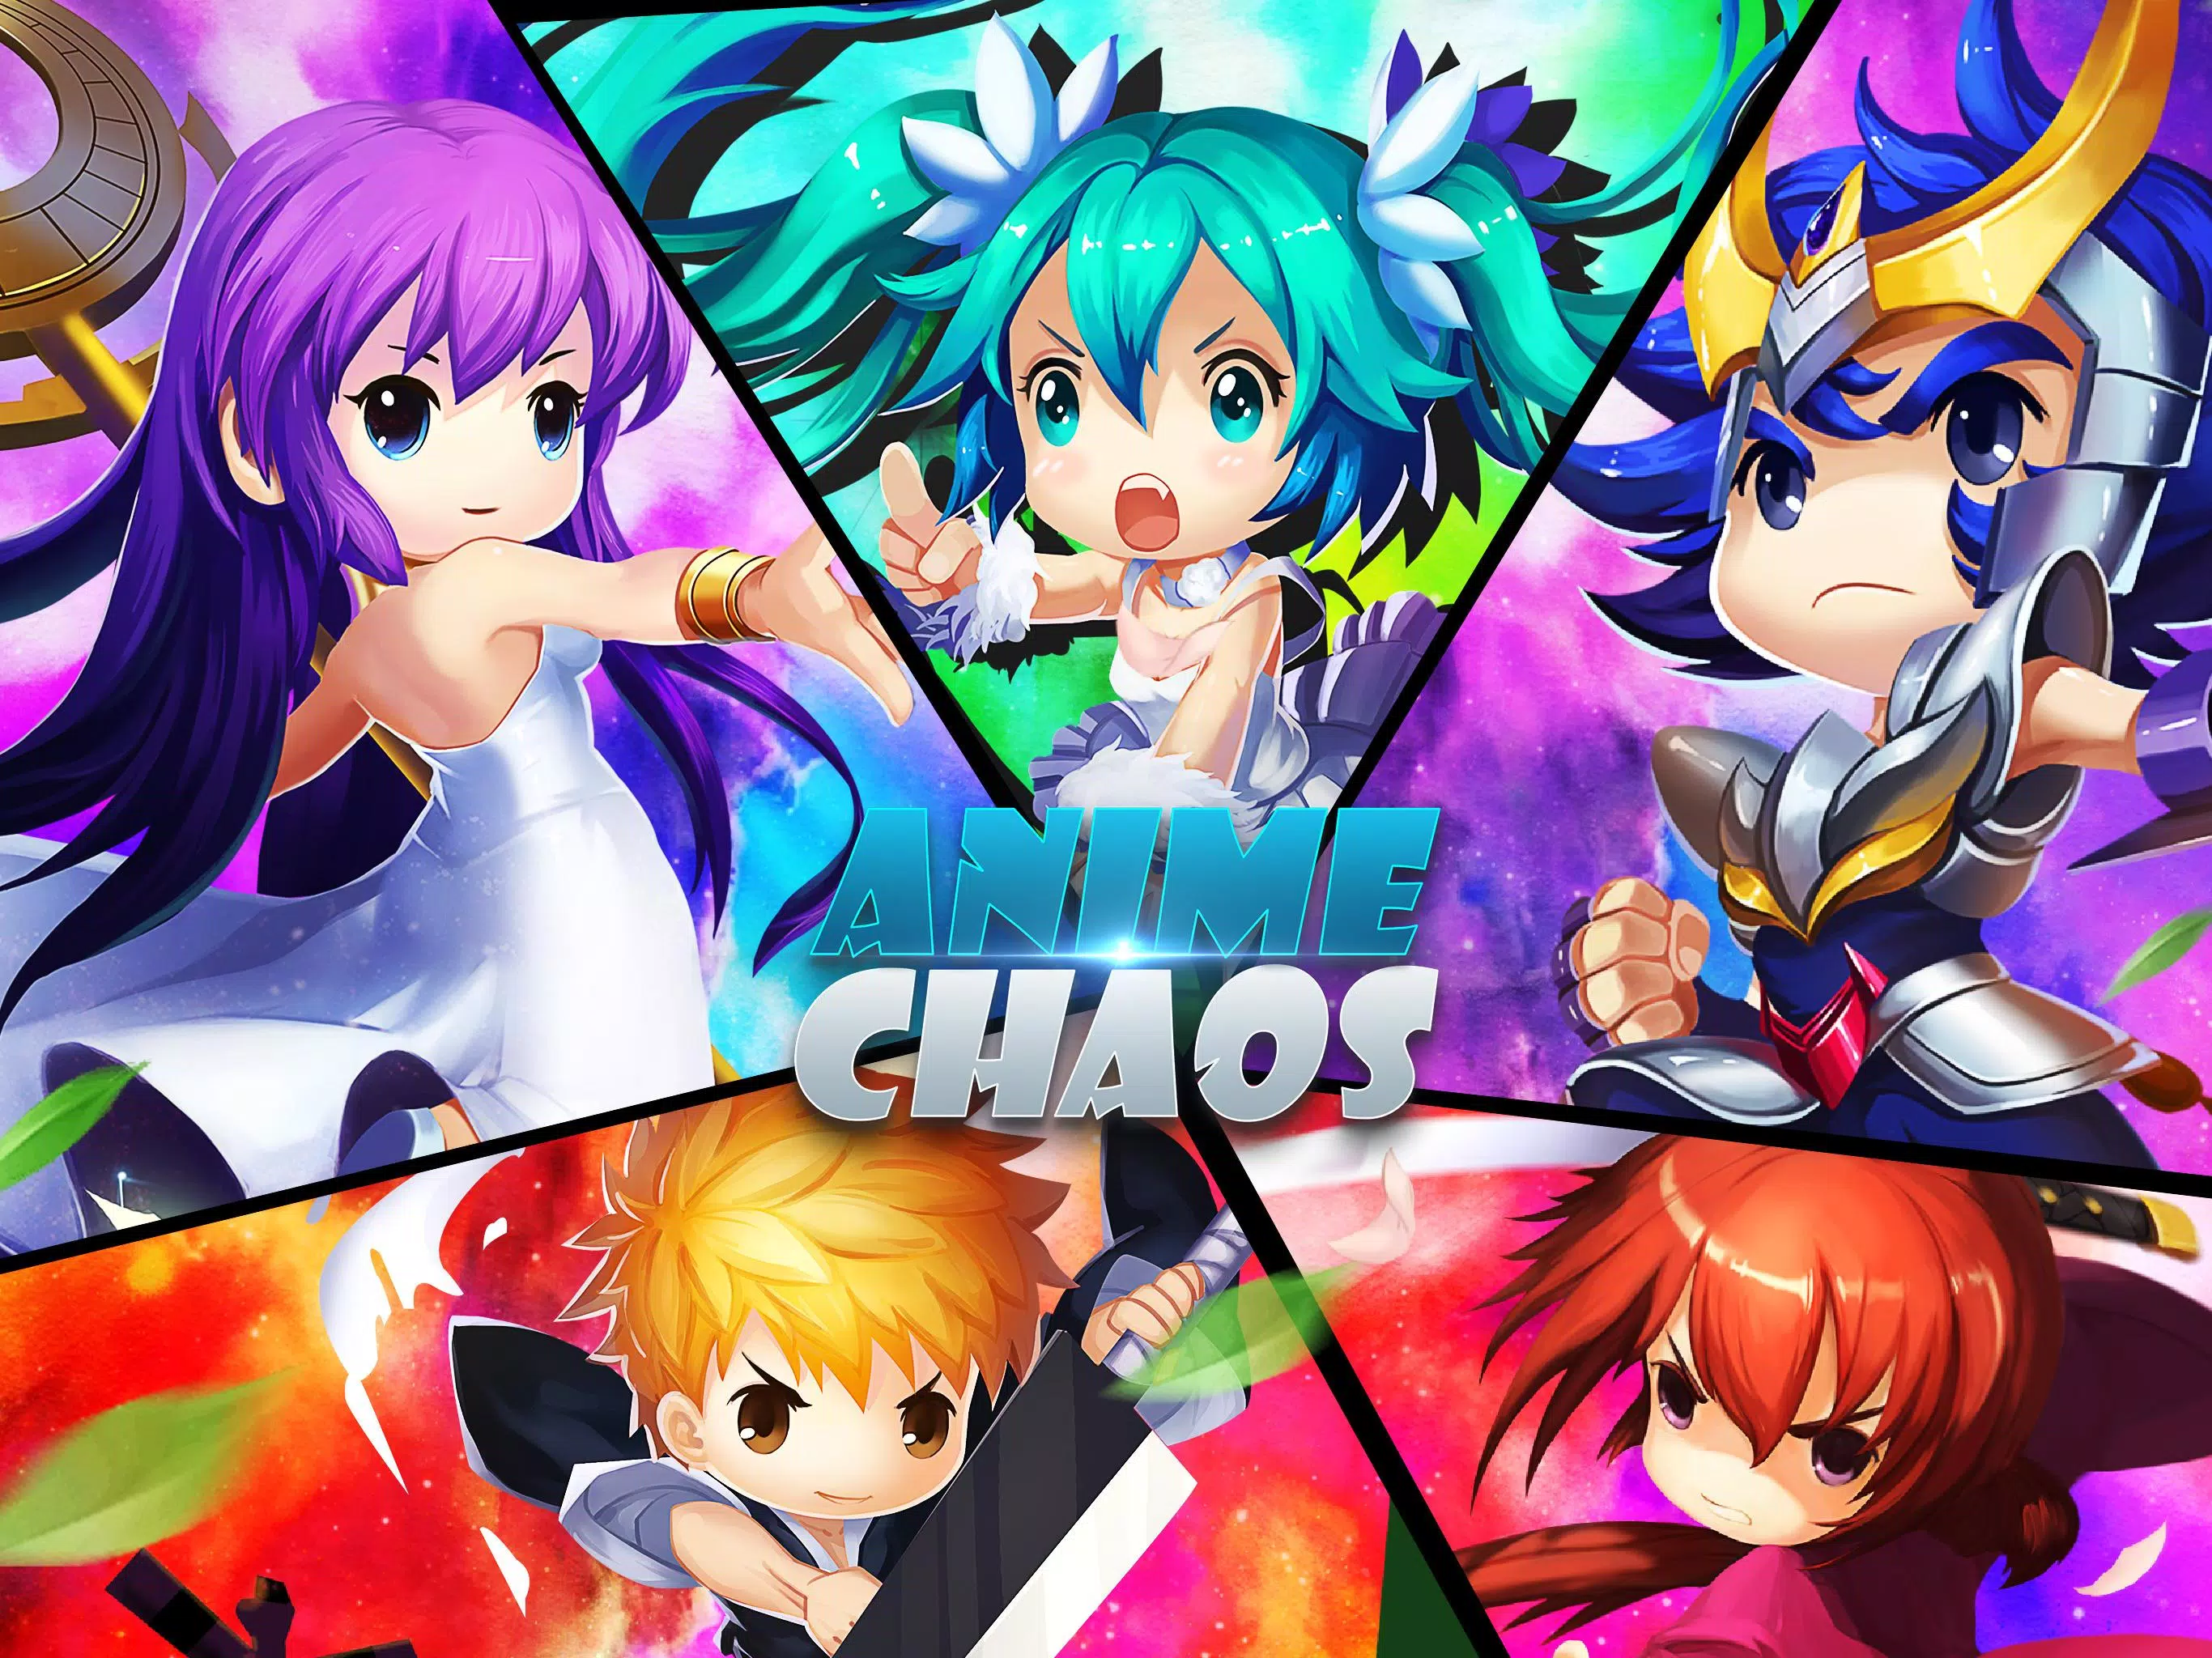 Anime Chaos Android Gameplay [1080p/60fps] 